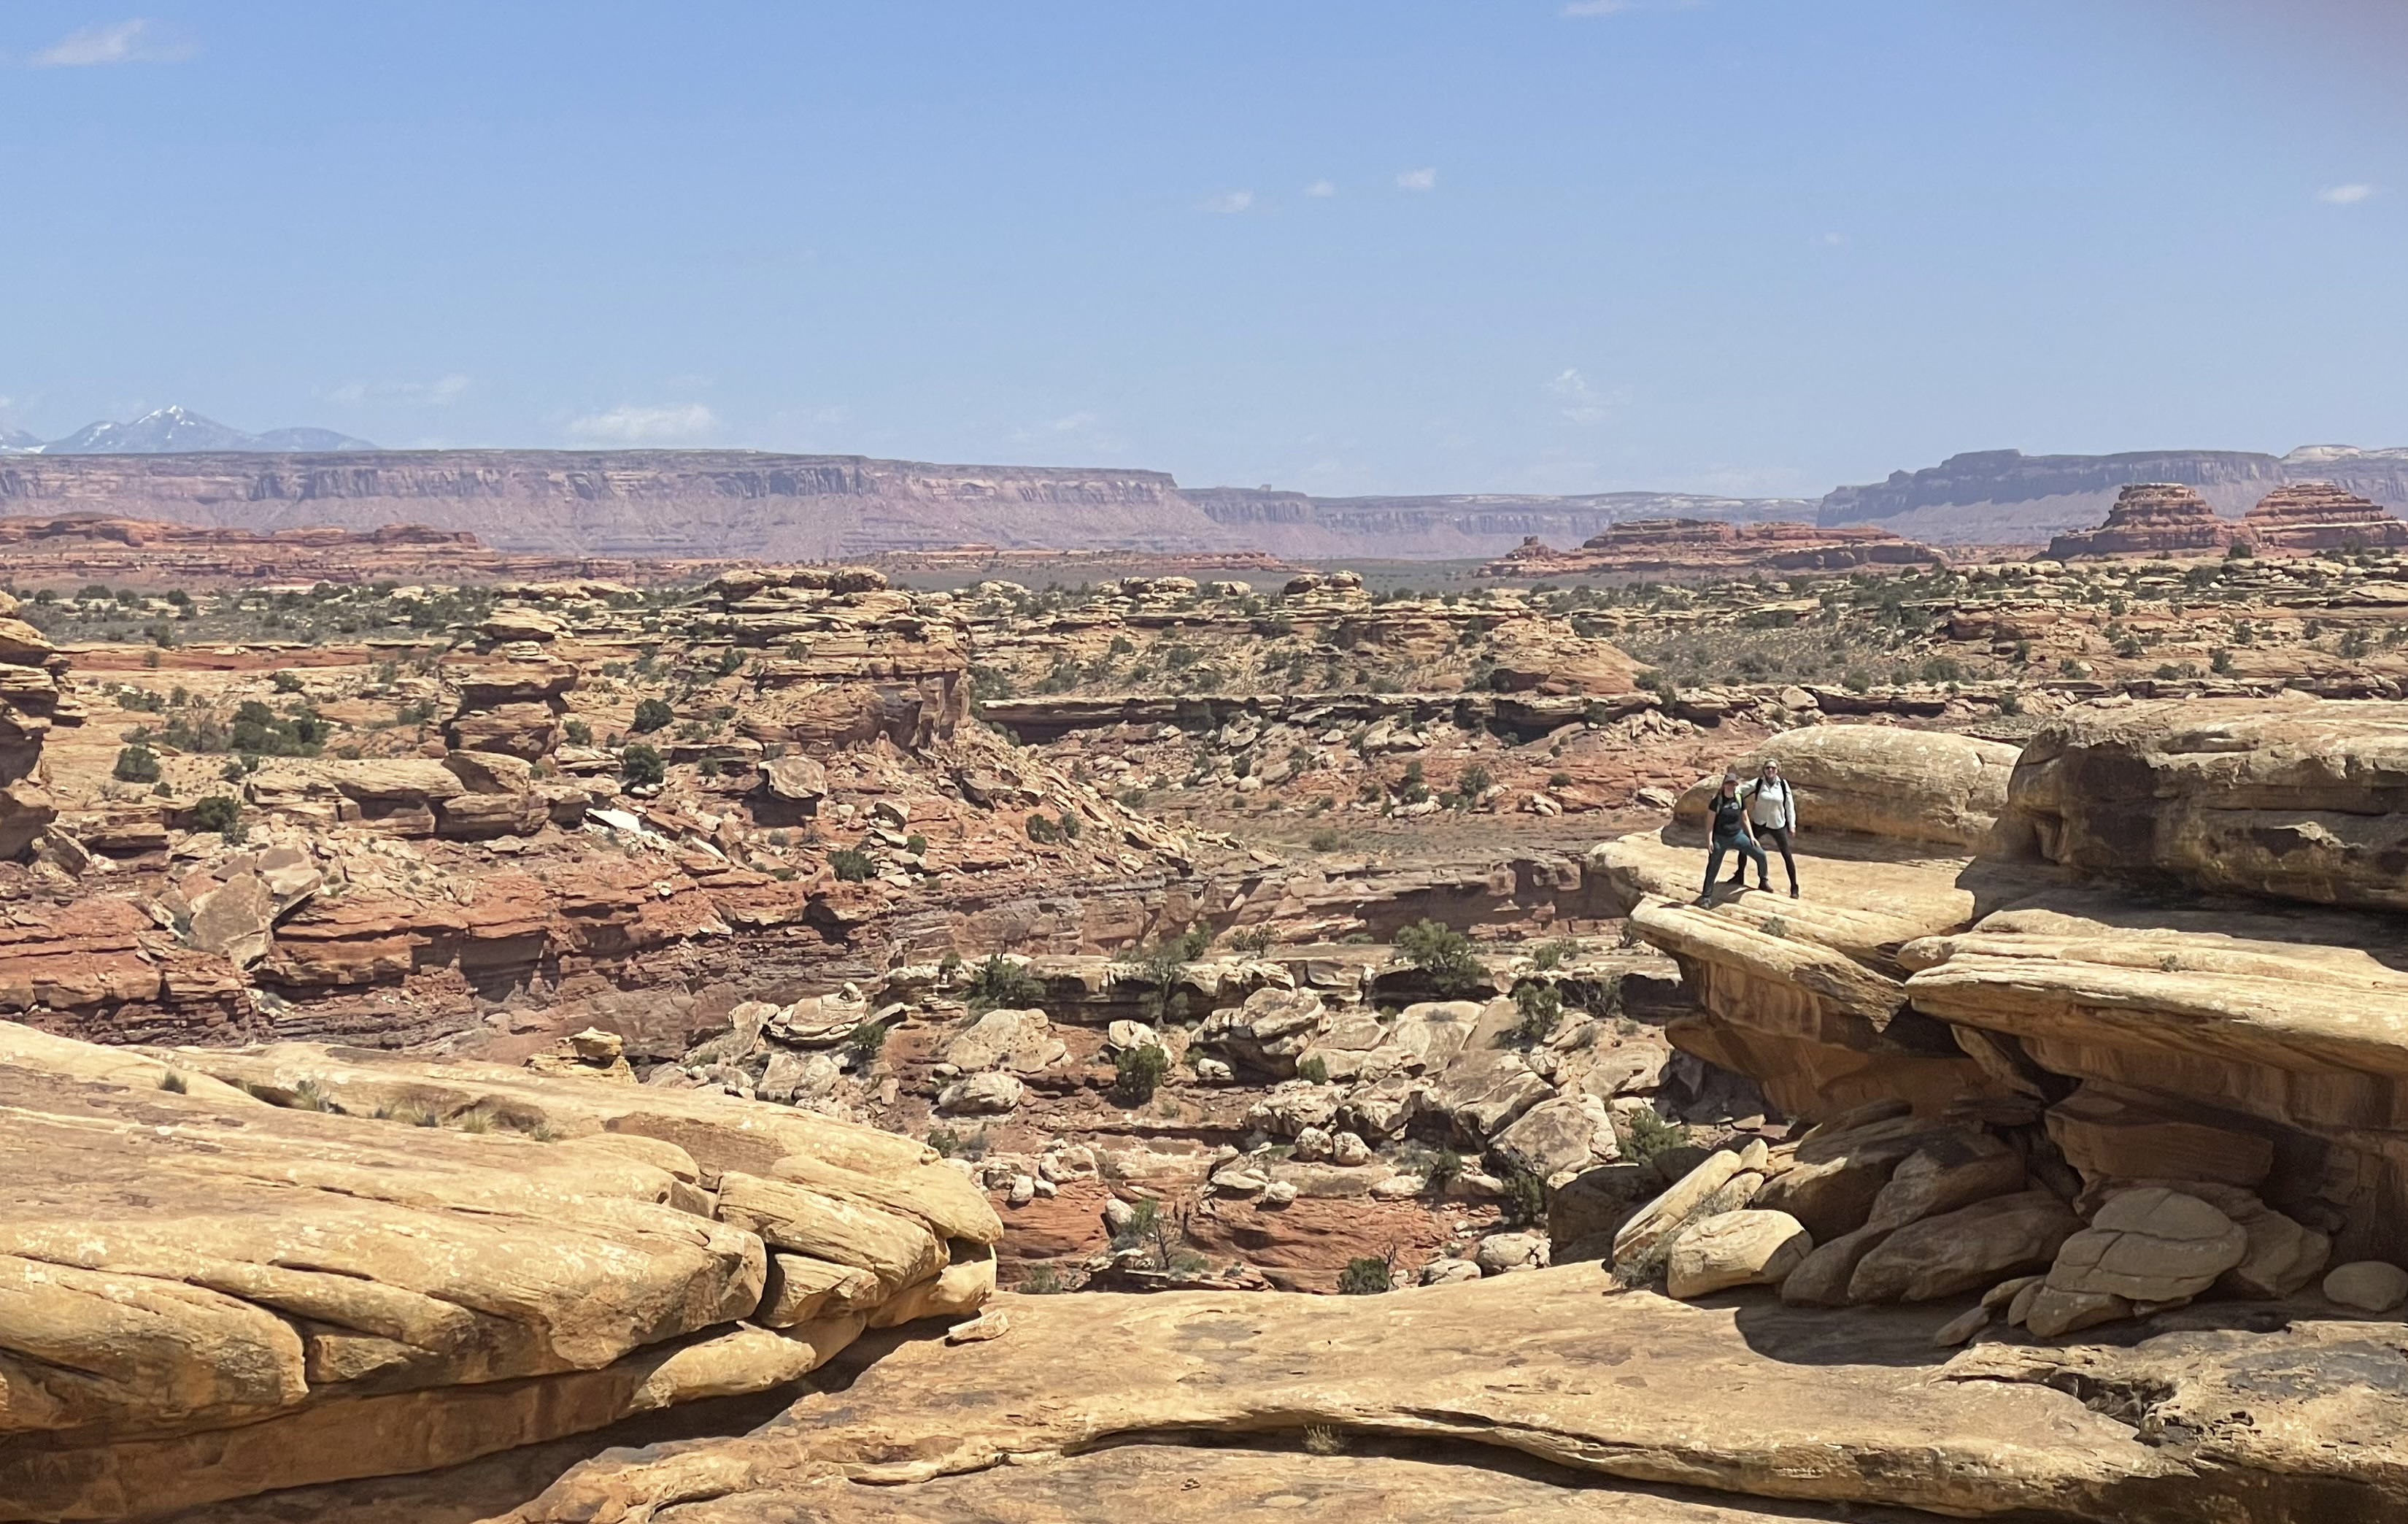 A clear day in Canyonlands National Park